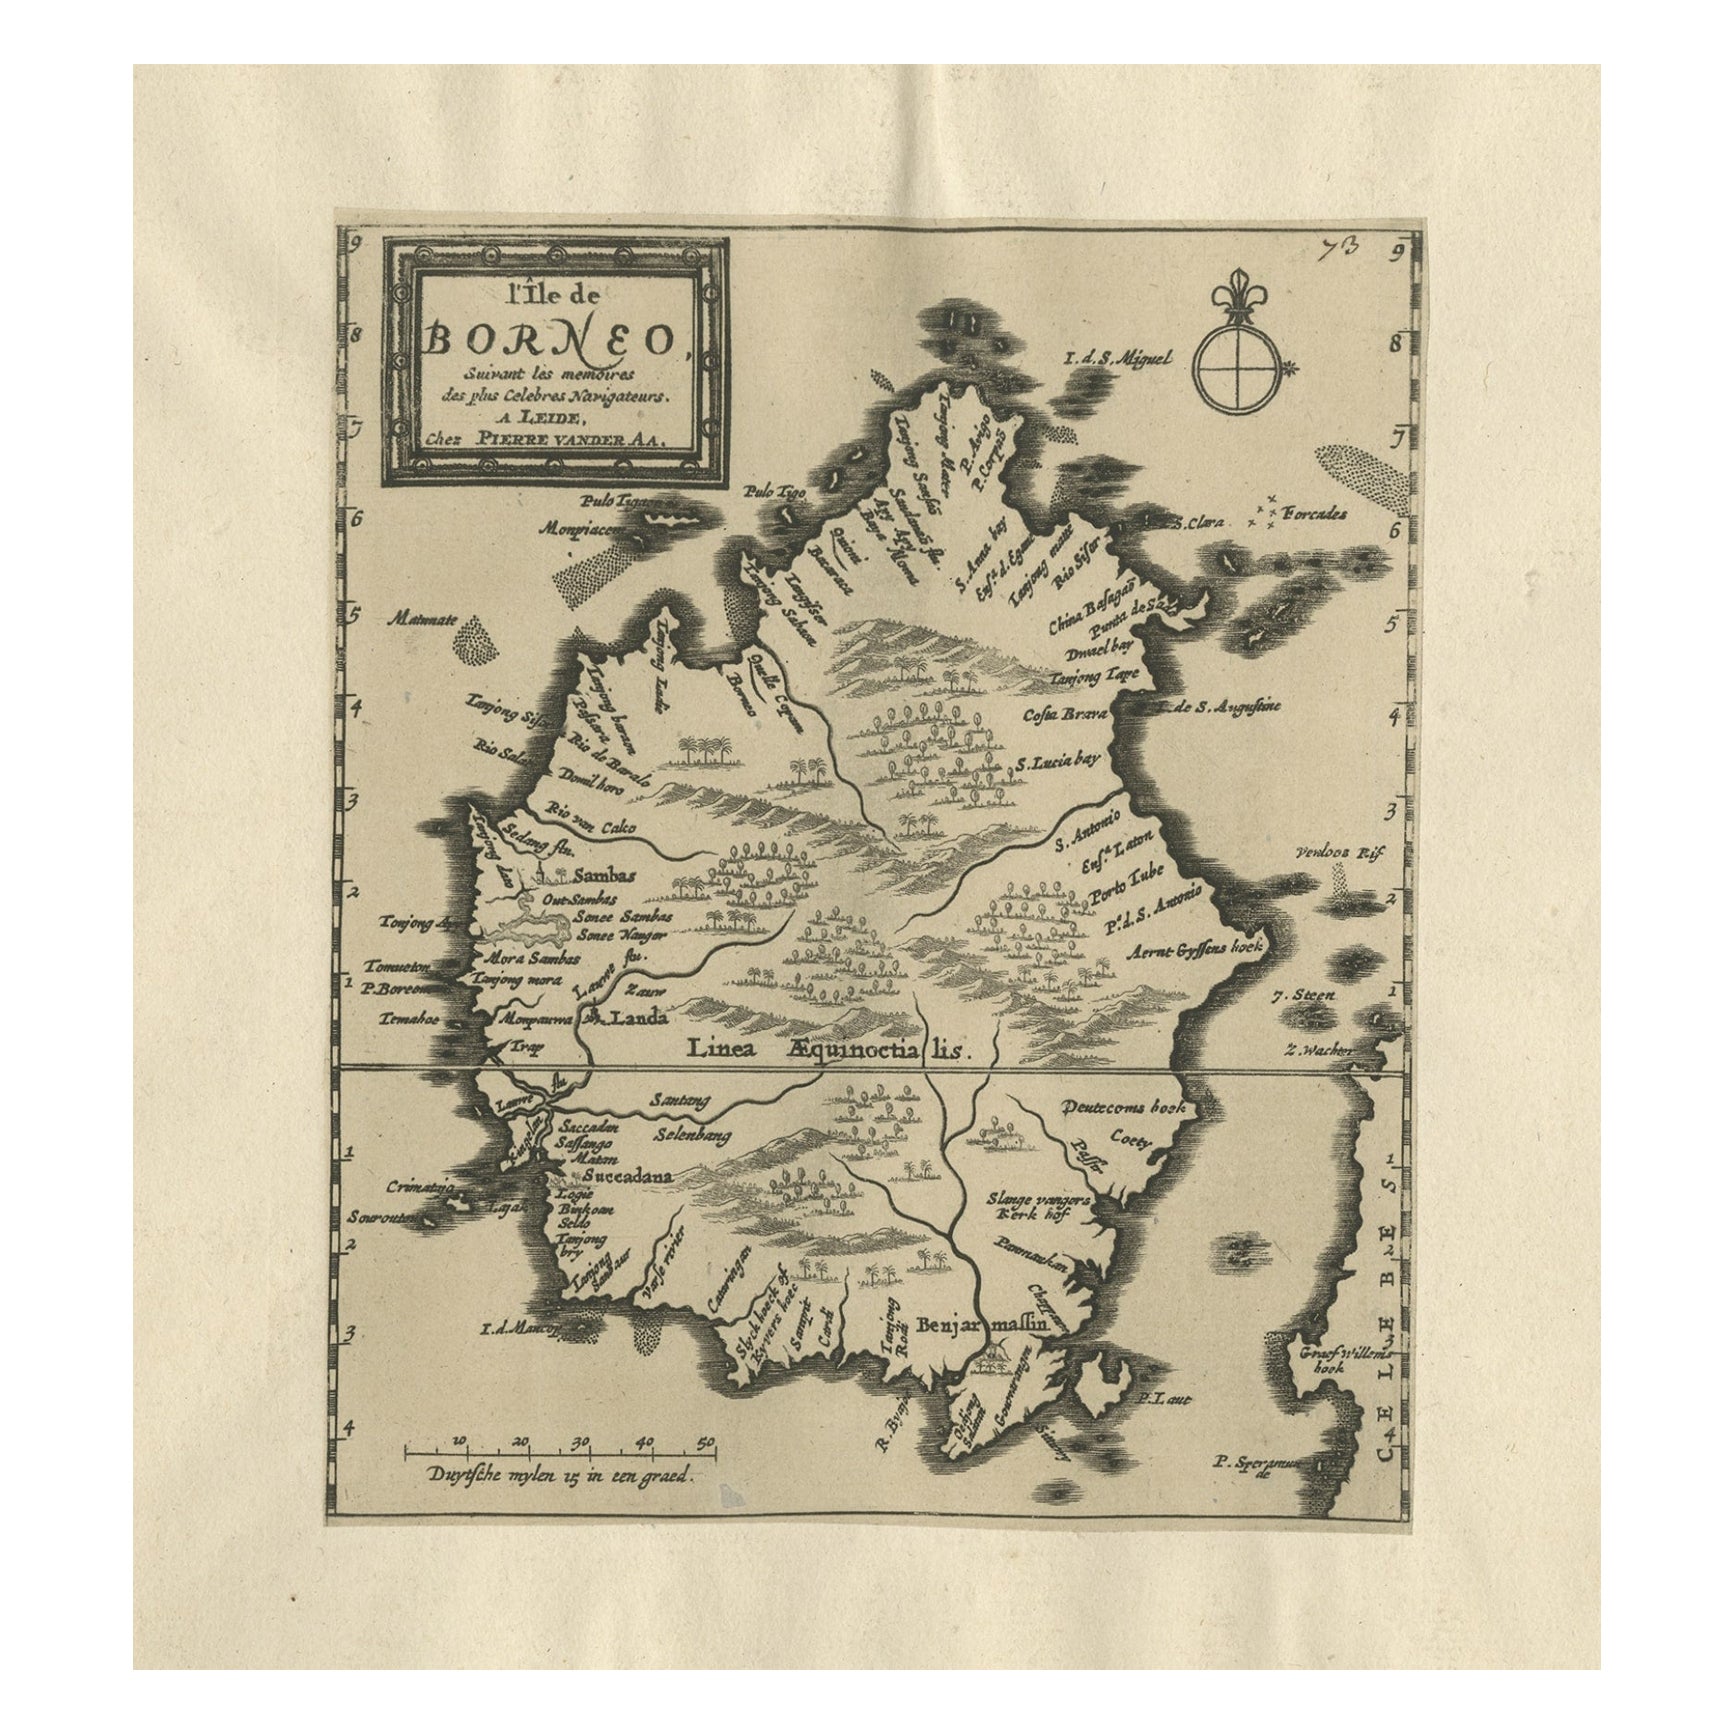 Extremely Scarce Antique Map of The Island of Borneo, Indonesia, c. 1725 For Sale